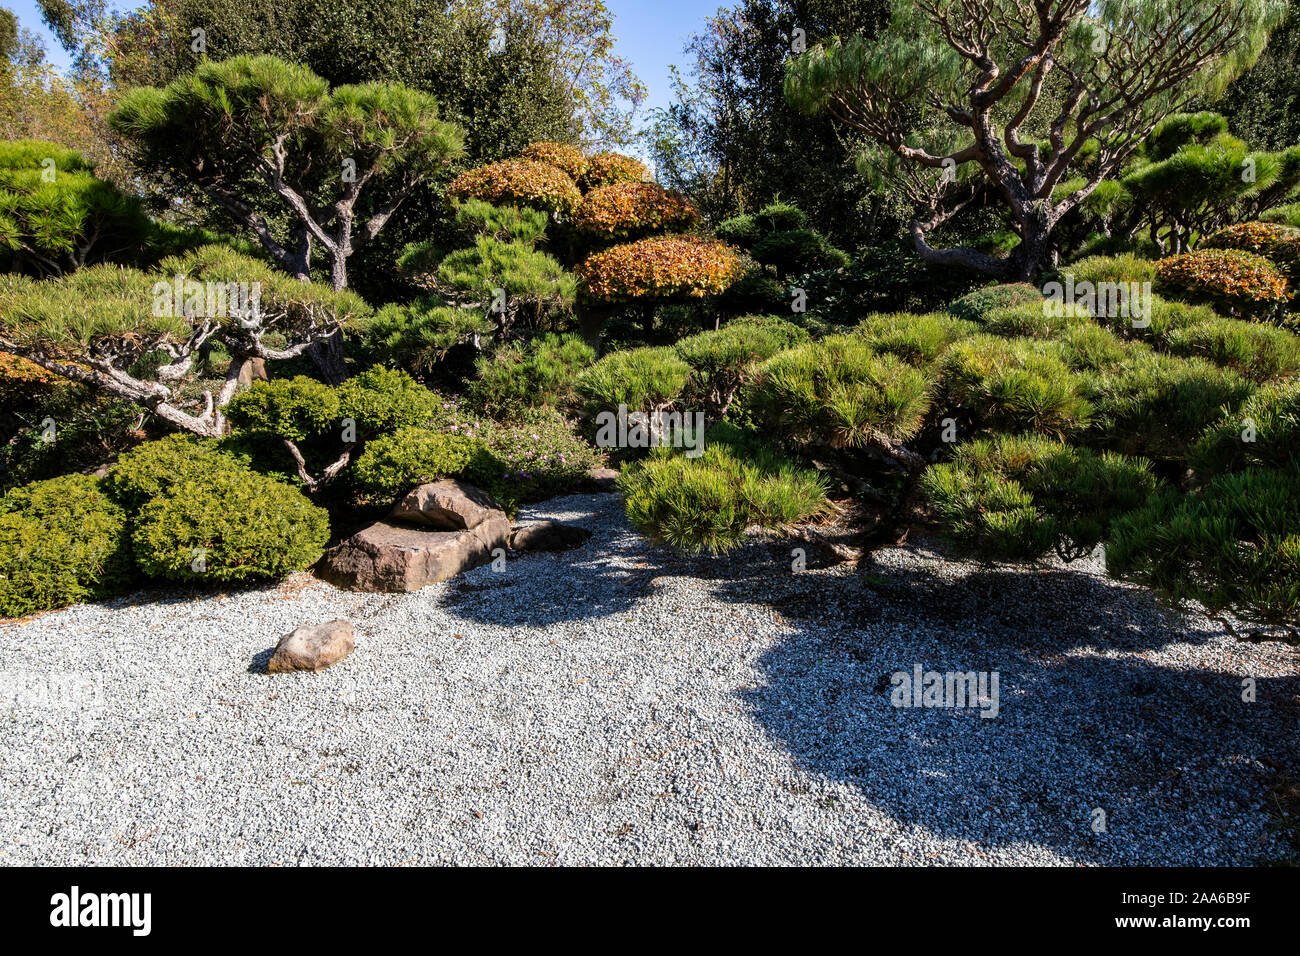 The Hayward Japanese Garden is one of the oldest Japanese gardens in California.  It was designed along traditional lines by Kimio Kimura following Ja Stock Photo